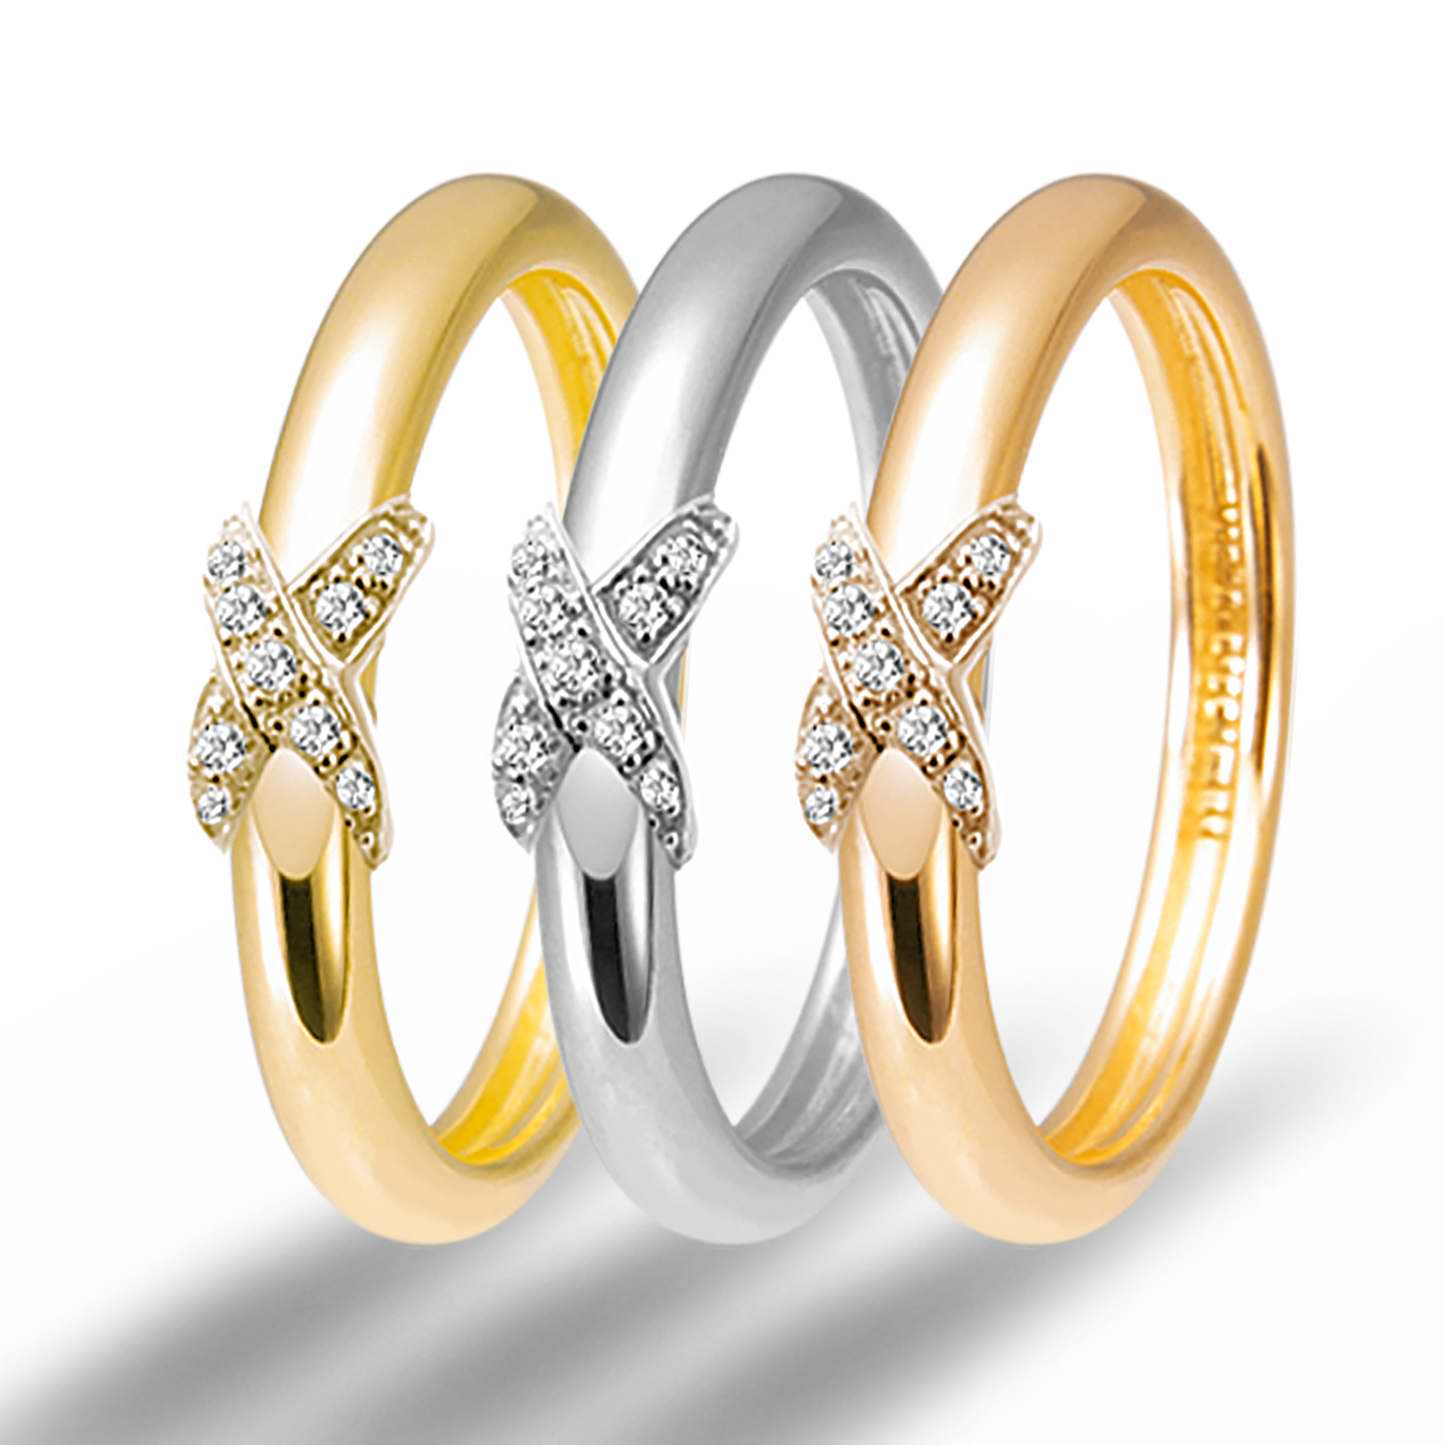 Composition of Les Favorites rings